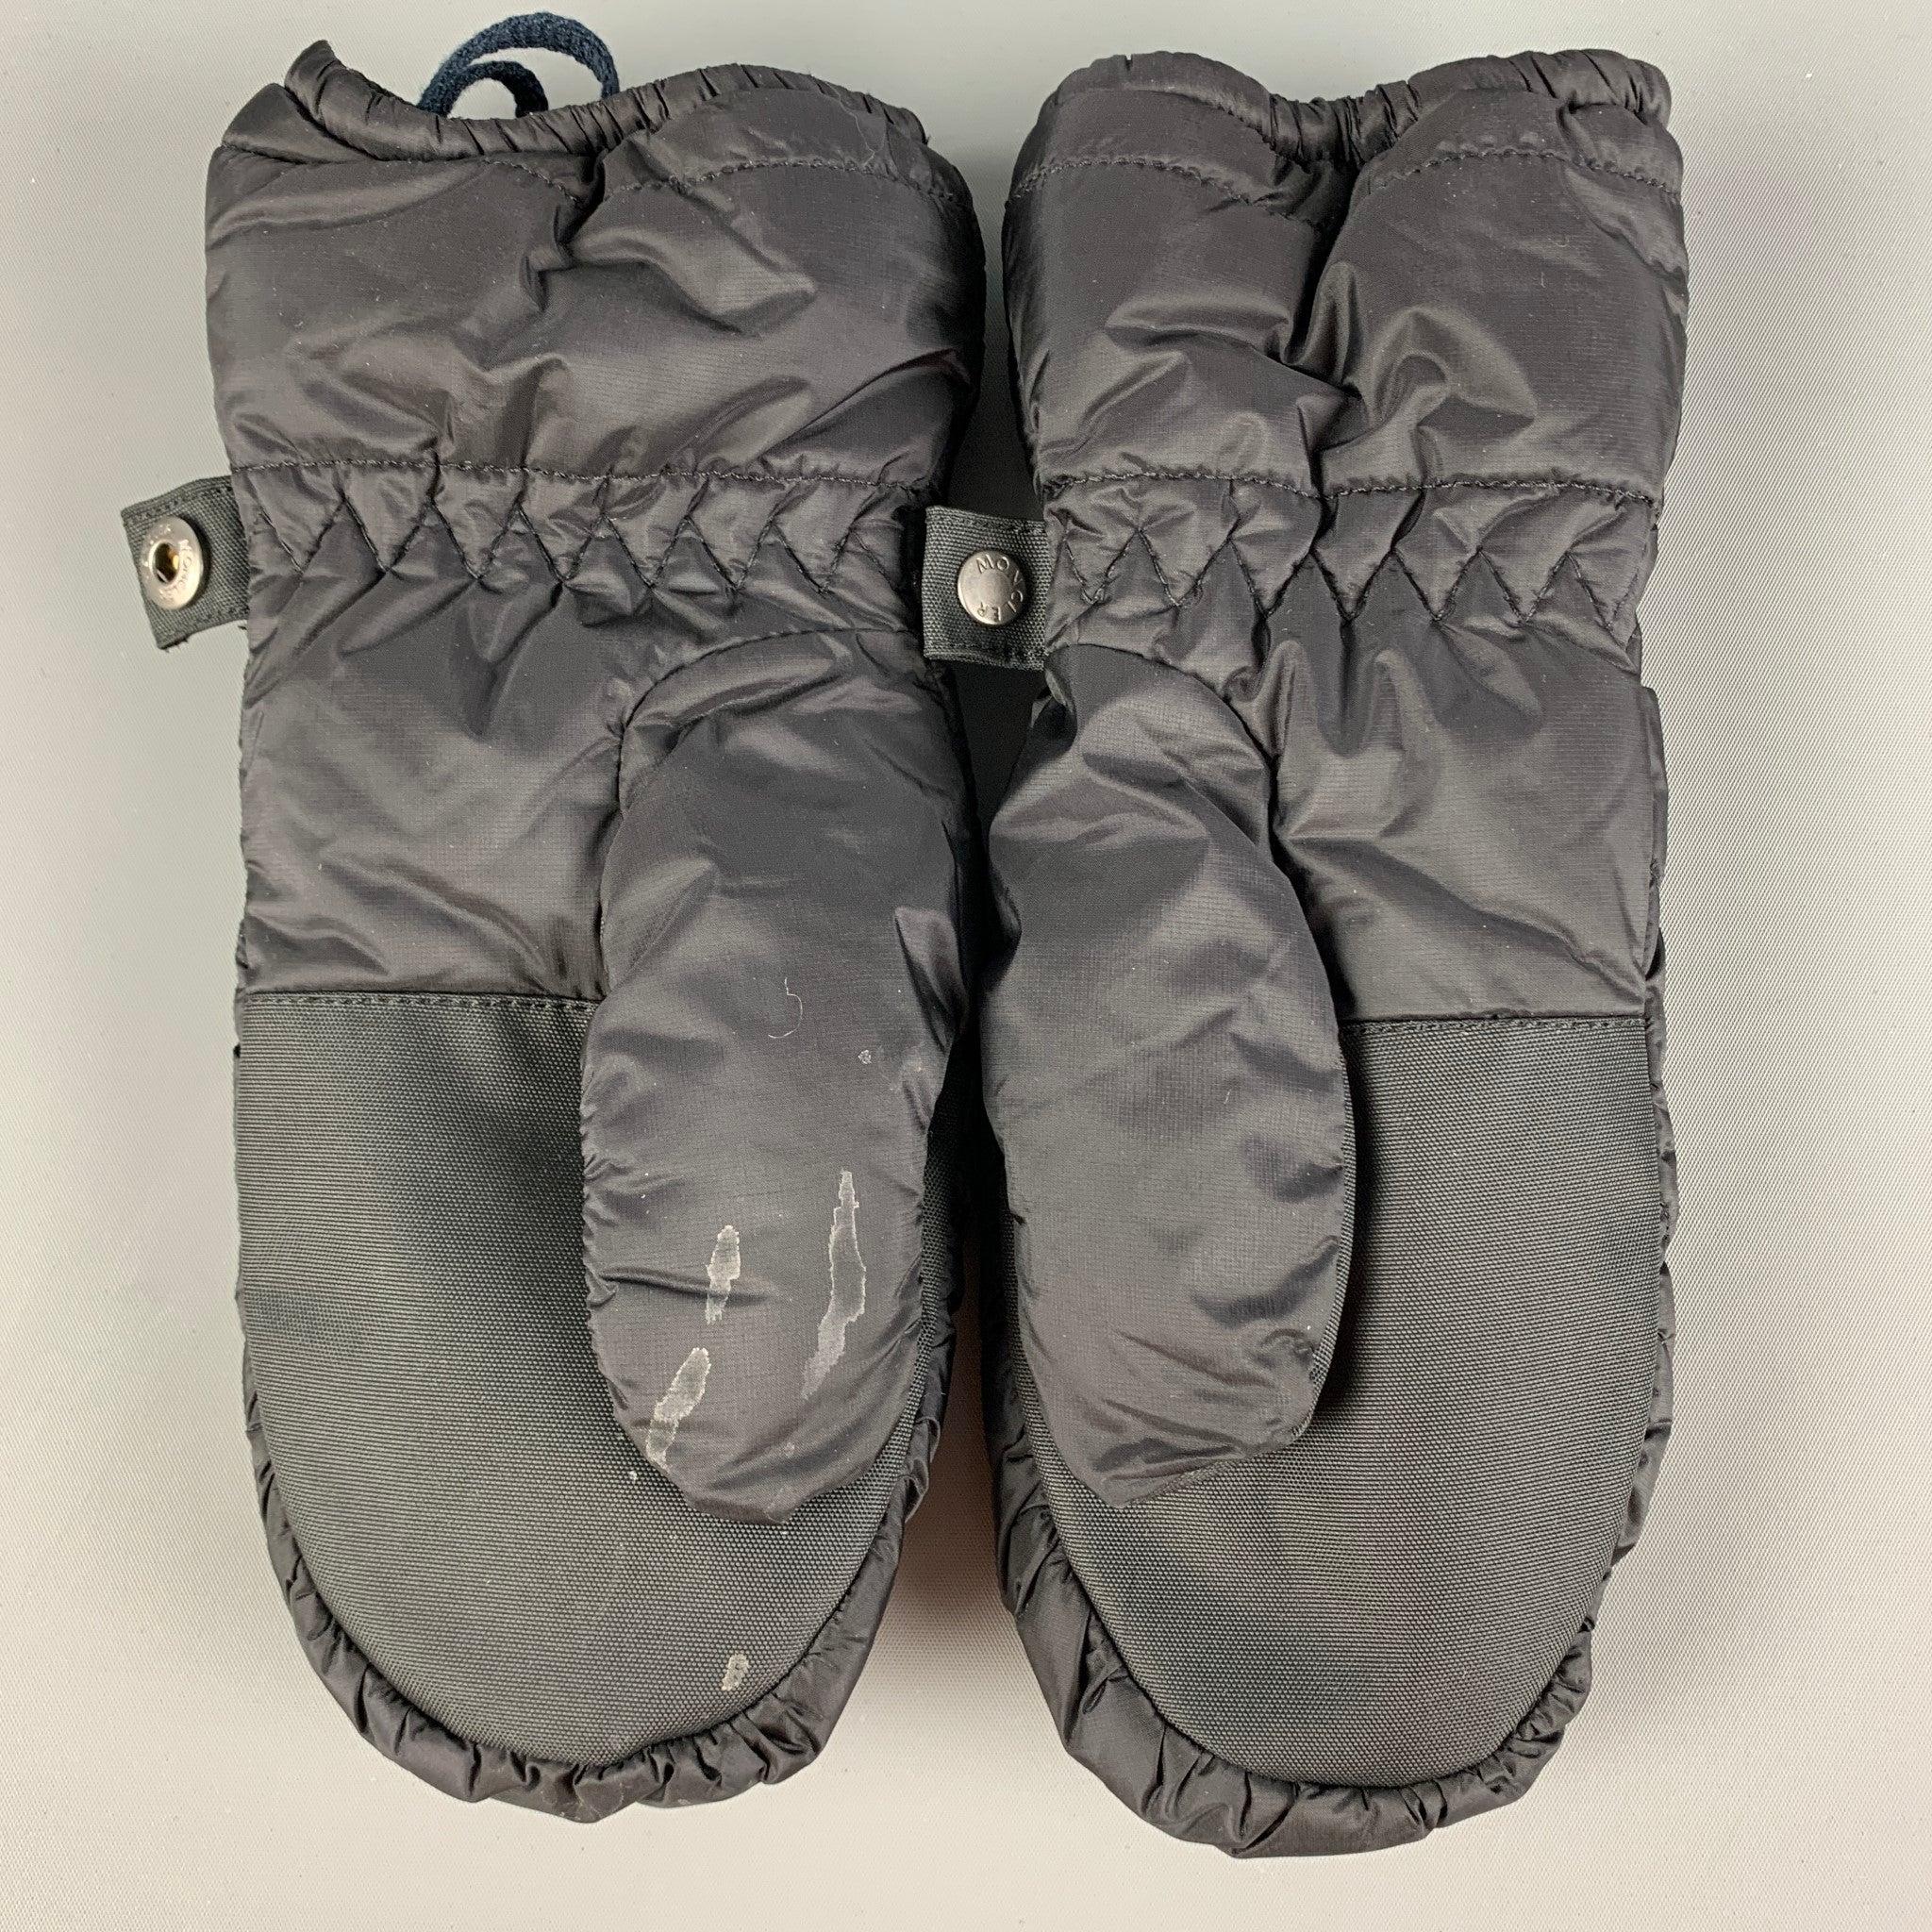 MONCLER mittens comes in a black nylon with a polyester lining and a elastic hem. Includes tags.
Good
Pre-Owned Condition. Moderate discoloration. As-is.  

Marked:  
L  

Measurements: 
  Height: 9.8 inches Length: 4.25 inches 
  
  
 
Reference: